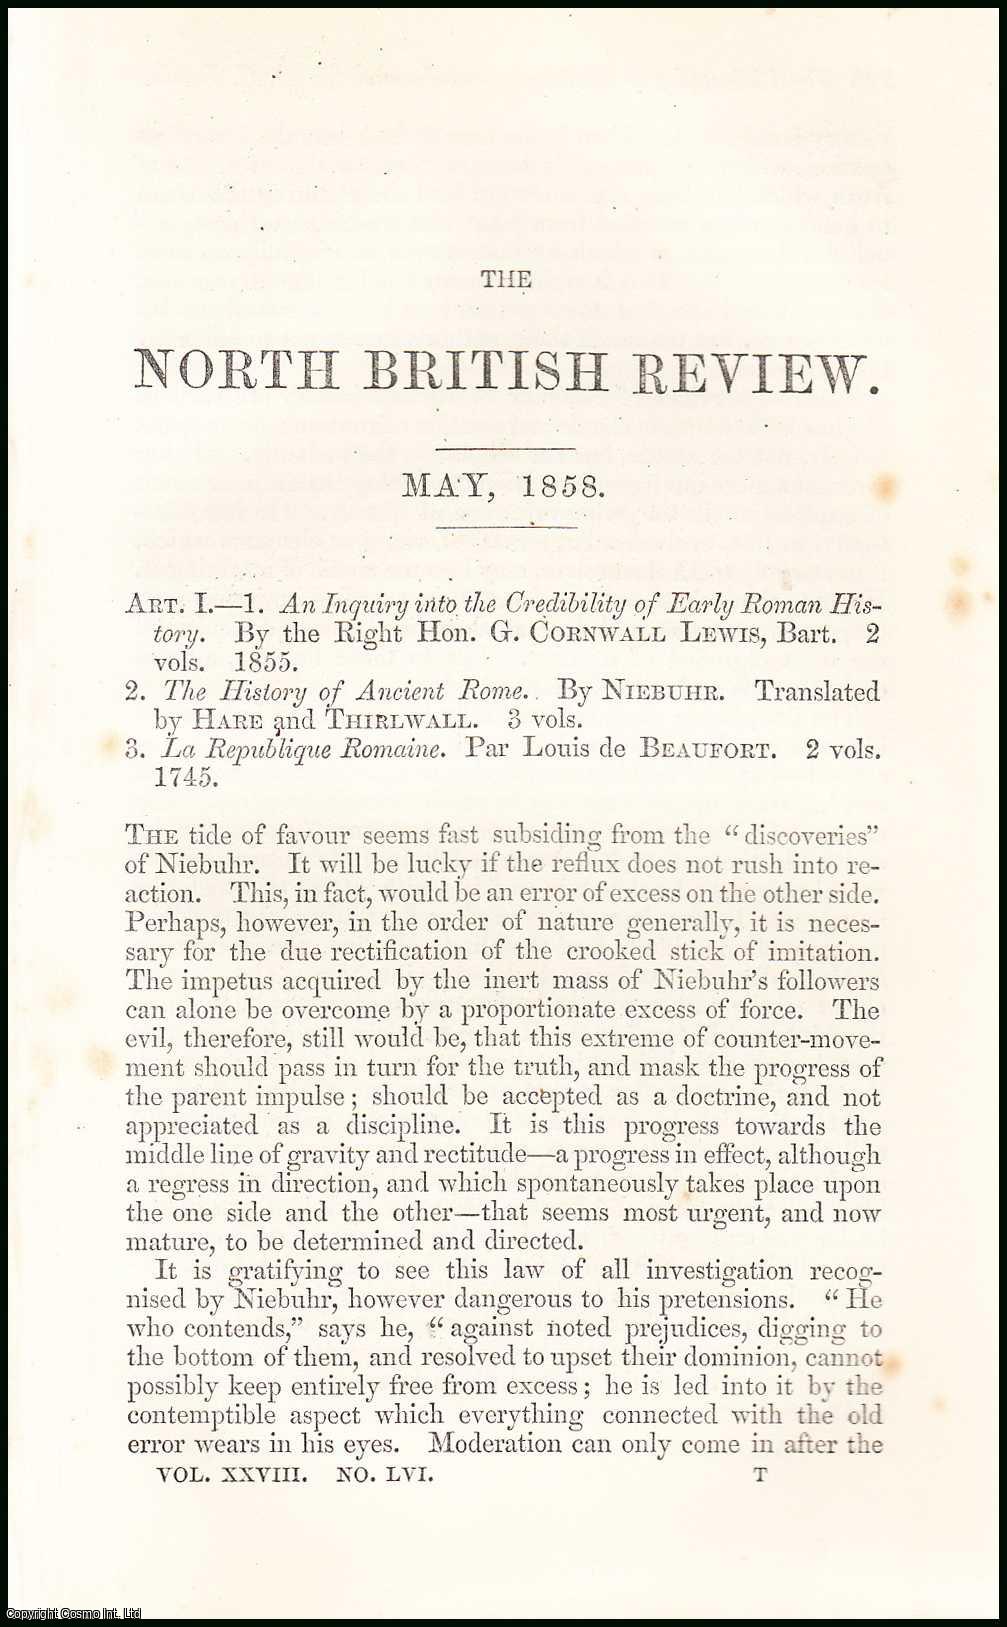 John O'Connell - The Philosophy of History : Niebuhr & Sir G.C. Lewis. An uncommon original article from the North British Review, 1858.